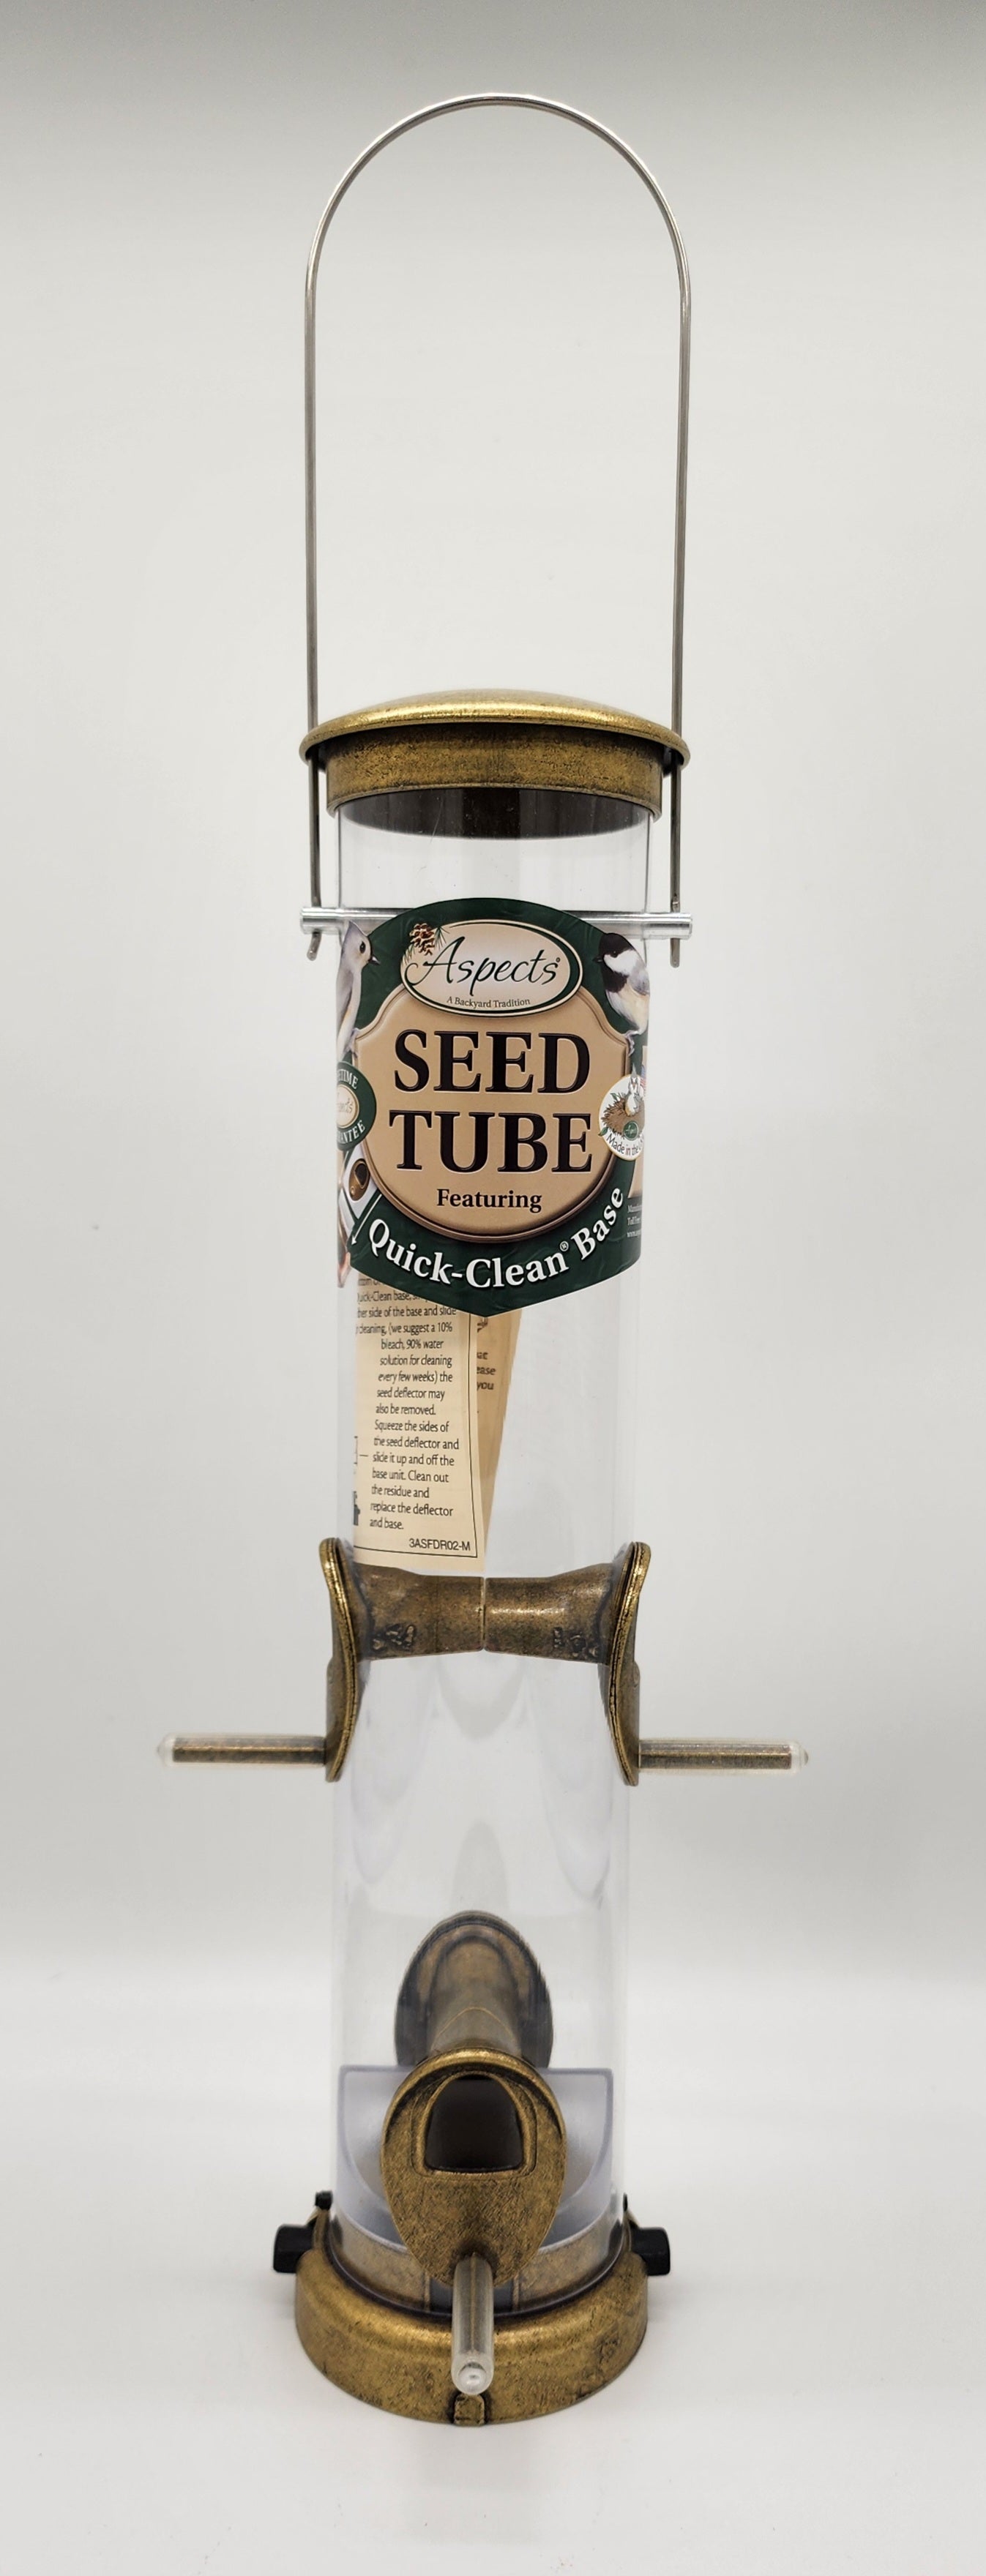 Aspects® Multi-Seed Tube Feeders w/Quick-Clean® Bases